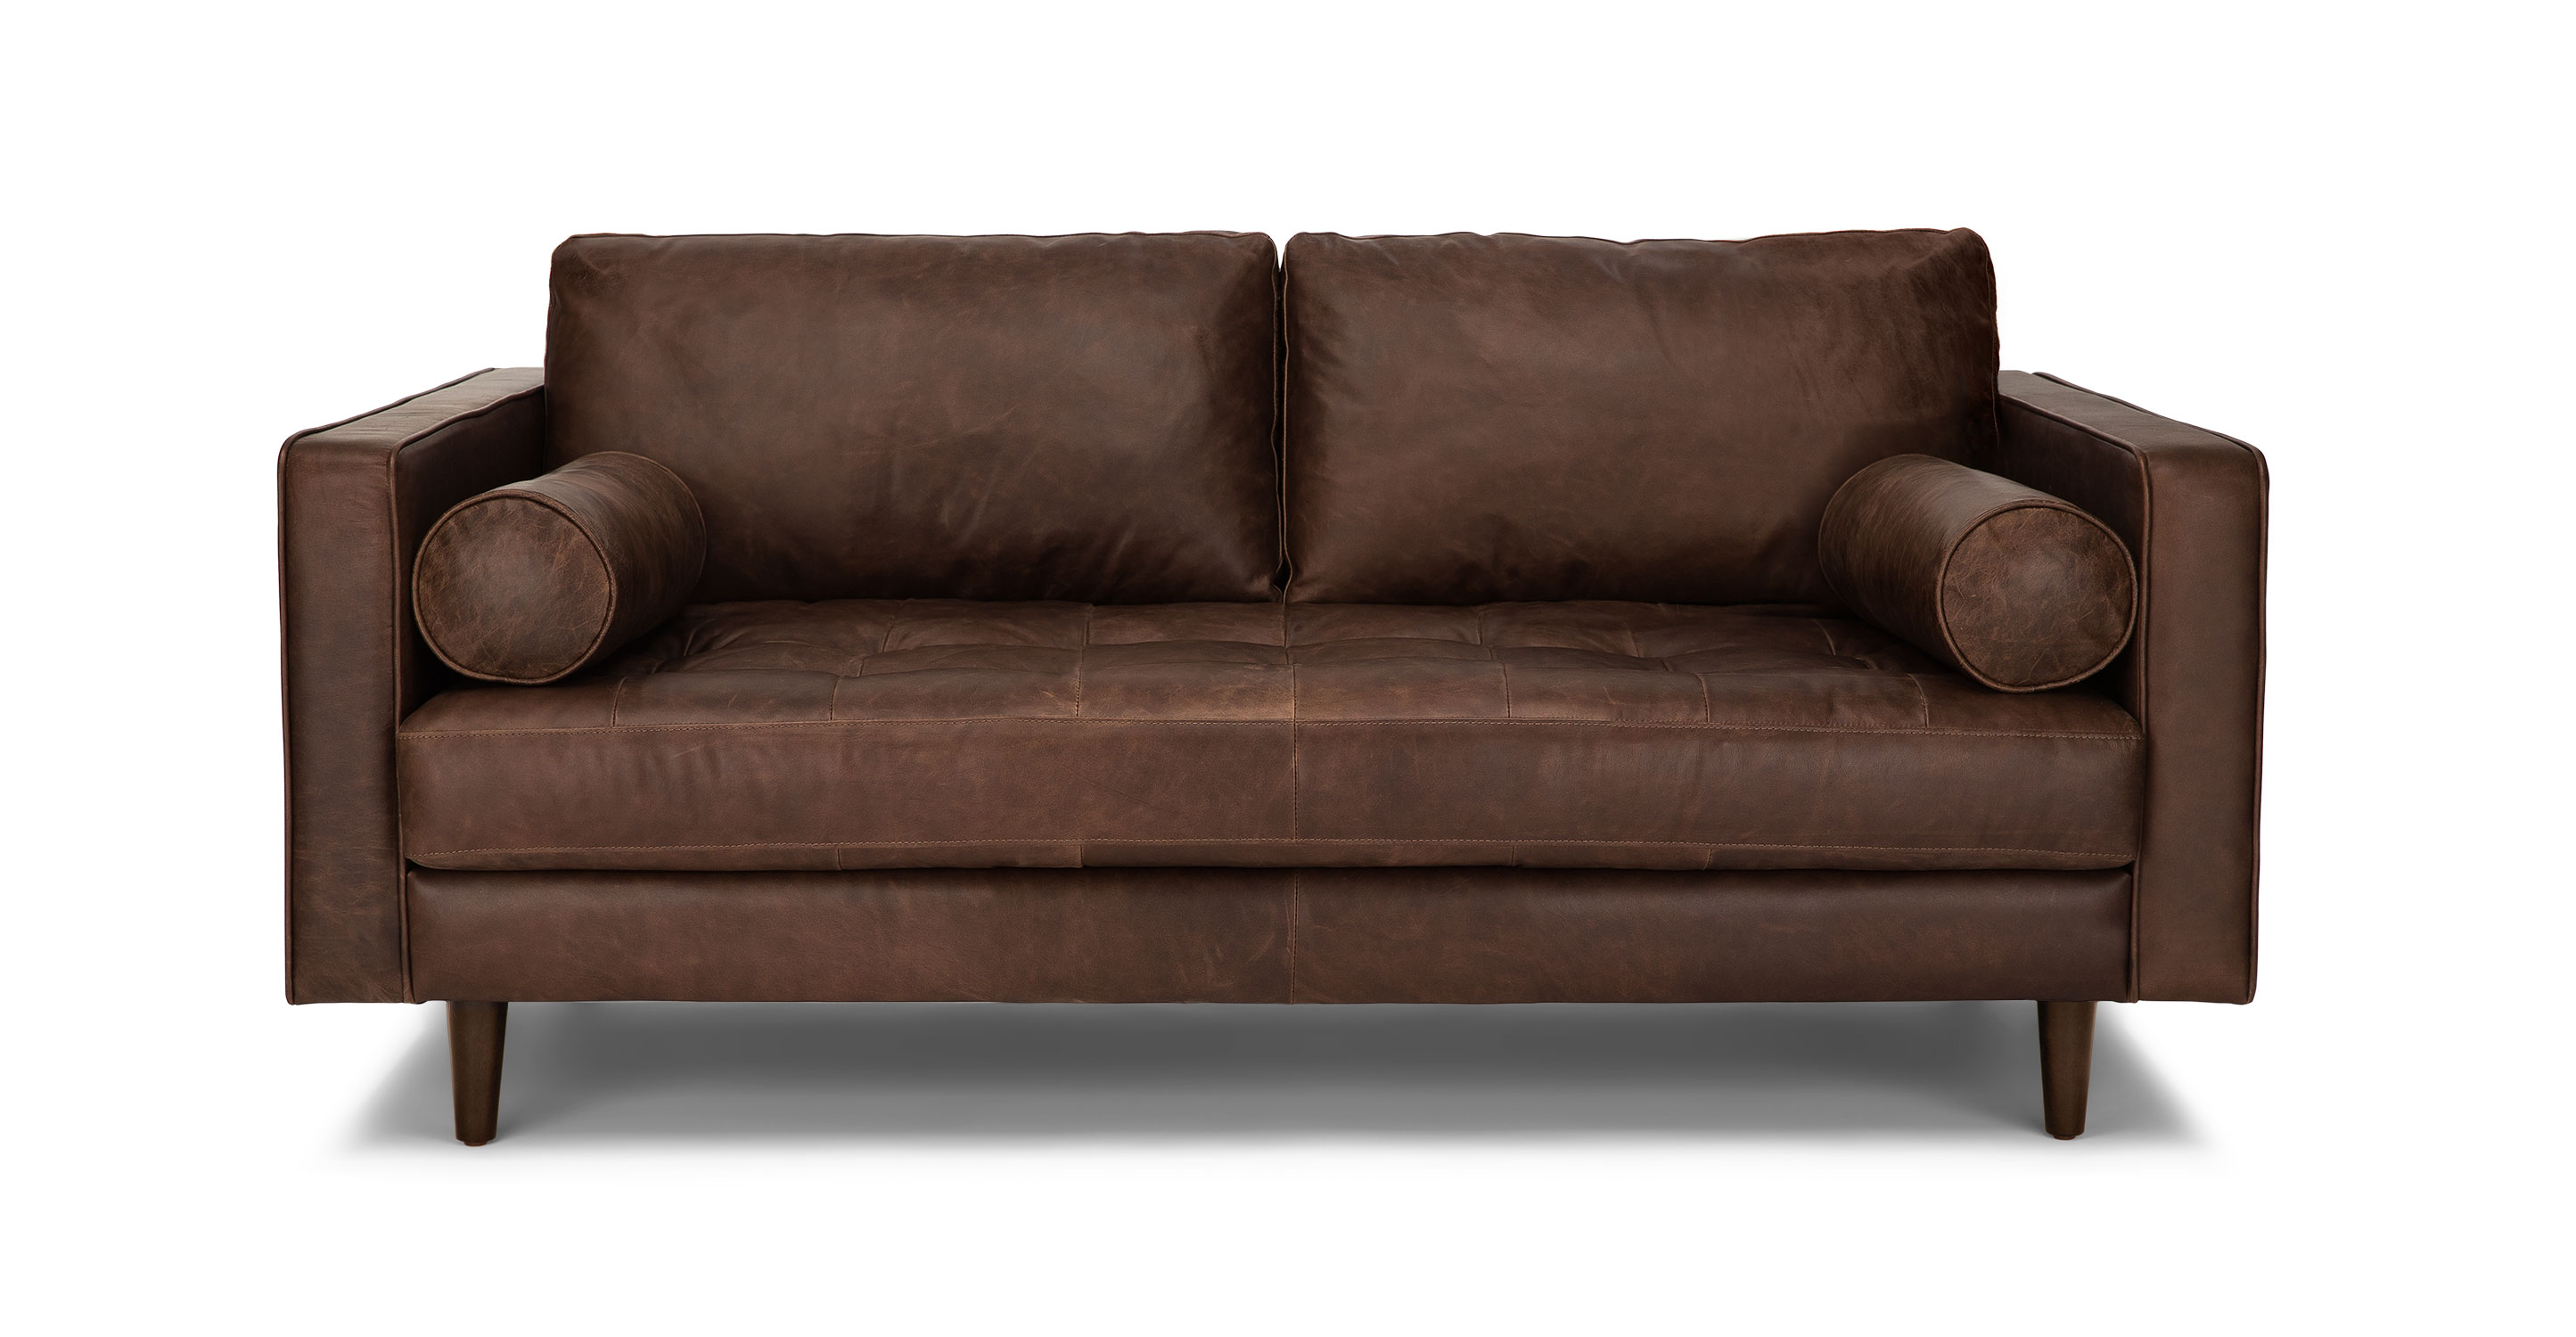 15 Most Comfortable Couch Options 2023 - Where to Buy Comfy Sofas